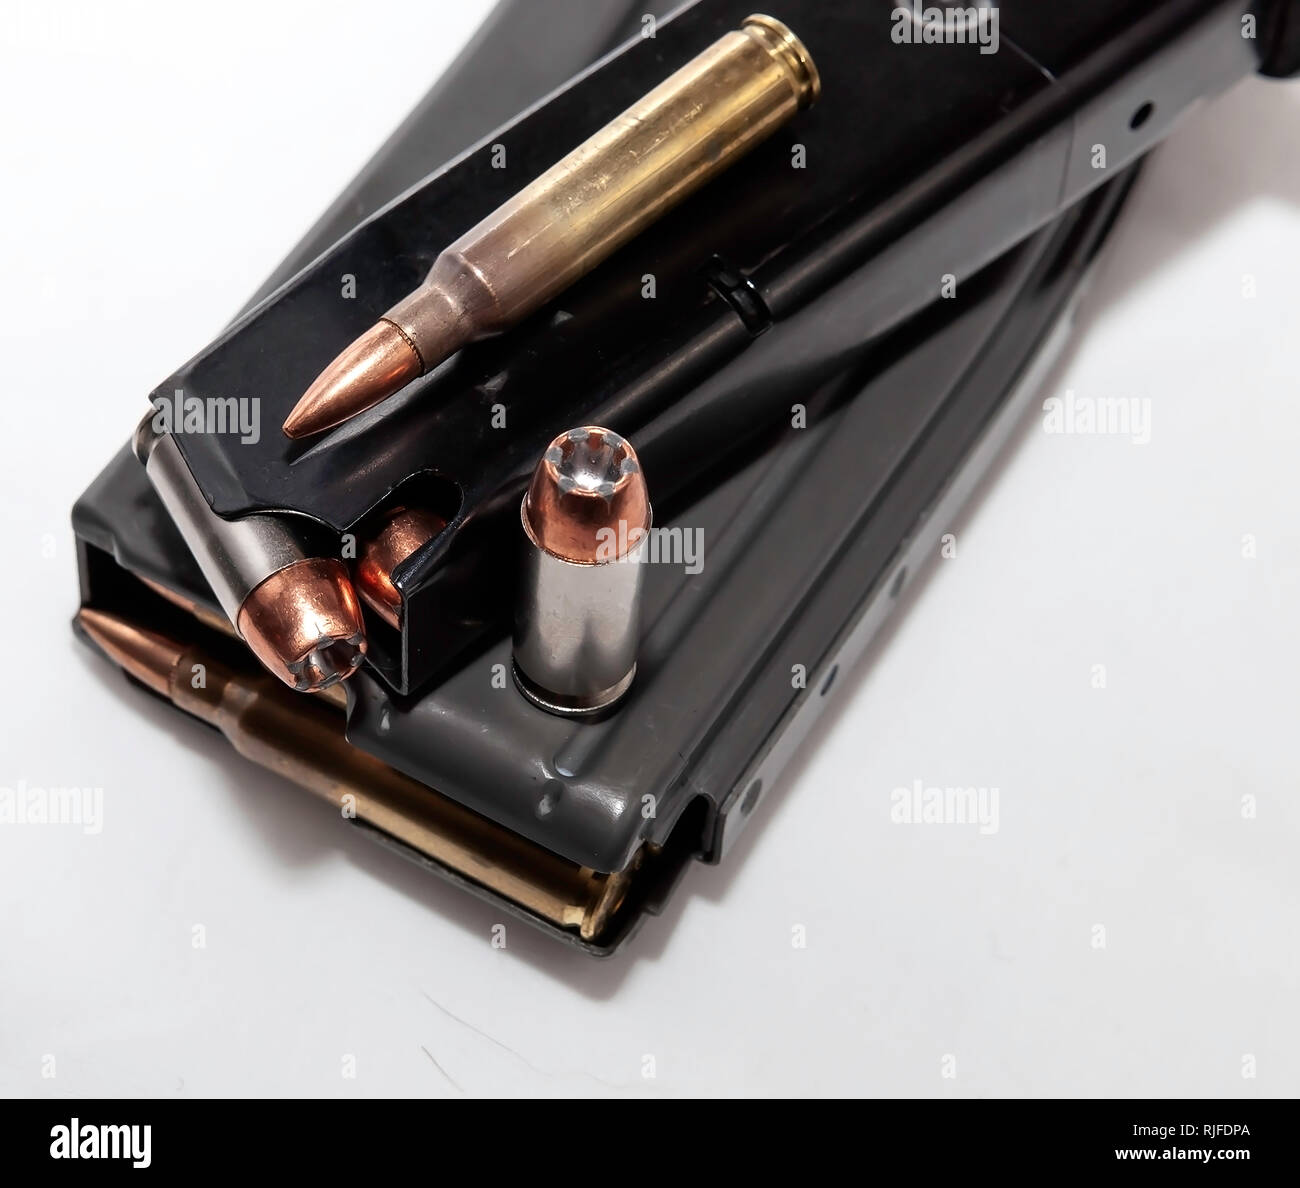 Two magazines, one for a pistol and one for a rifle both loaded with bullets with a 40 caliber and 223 caliber shown on top of them on a white backgro Stock Photo